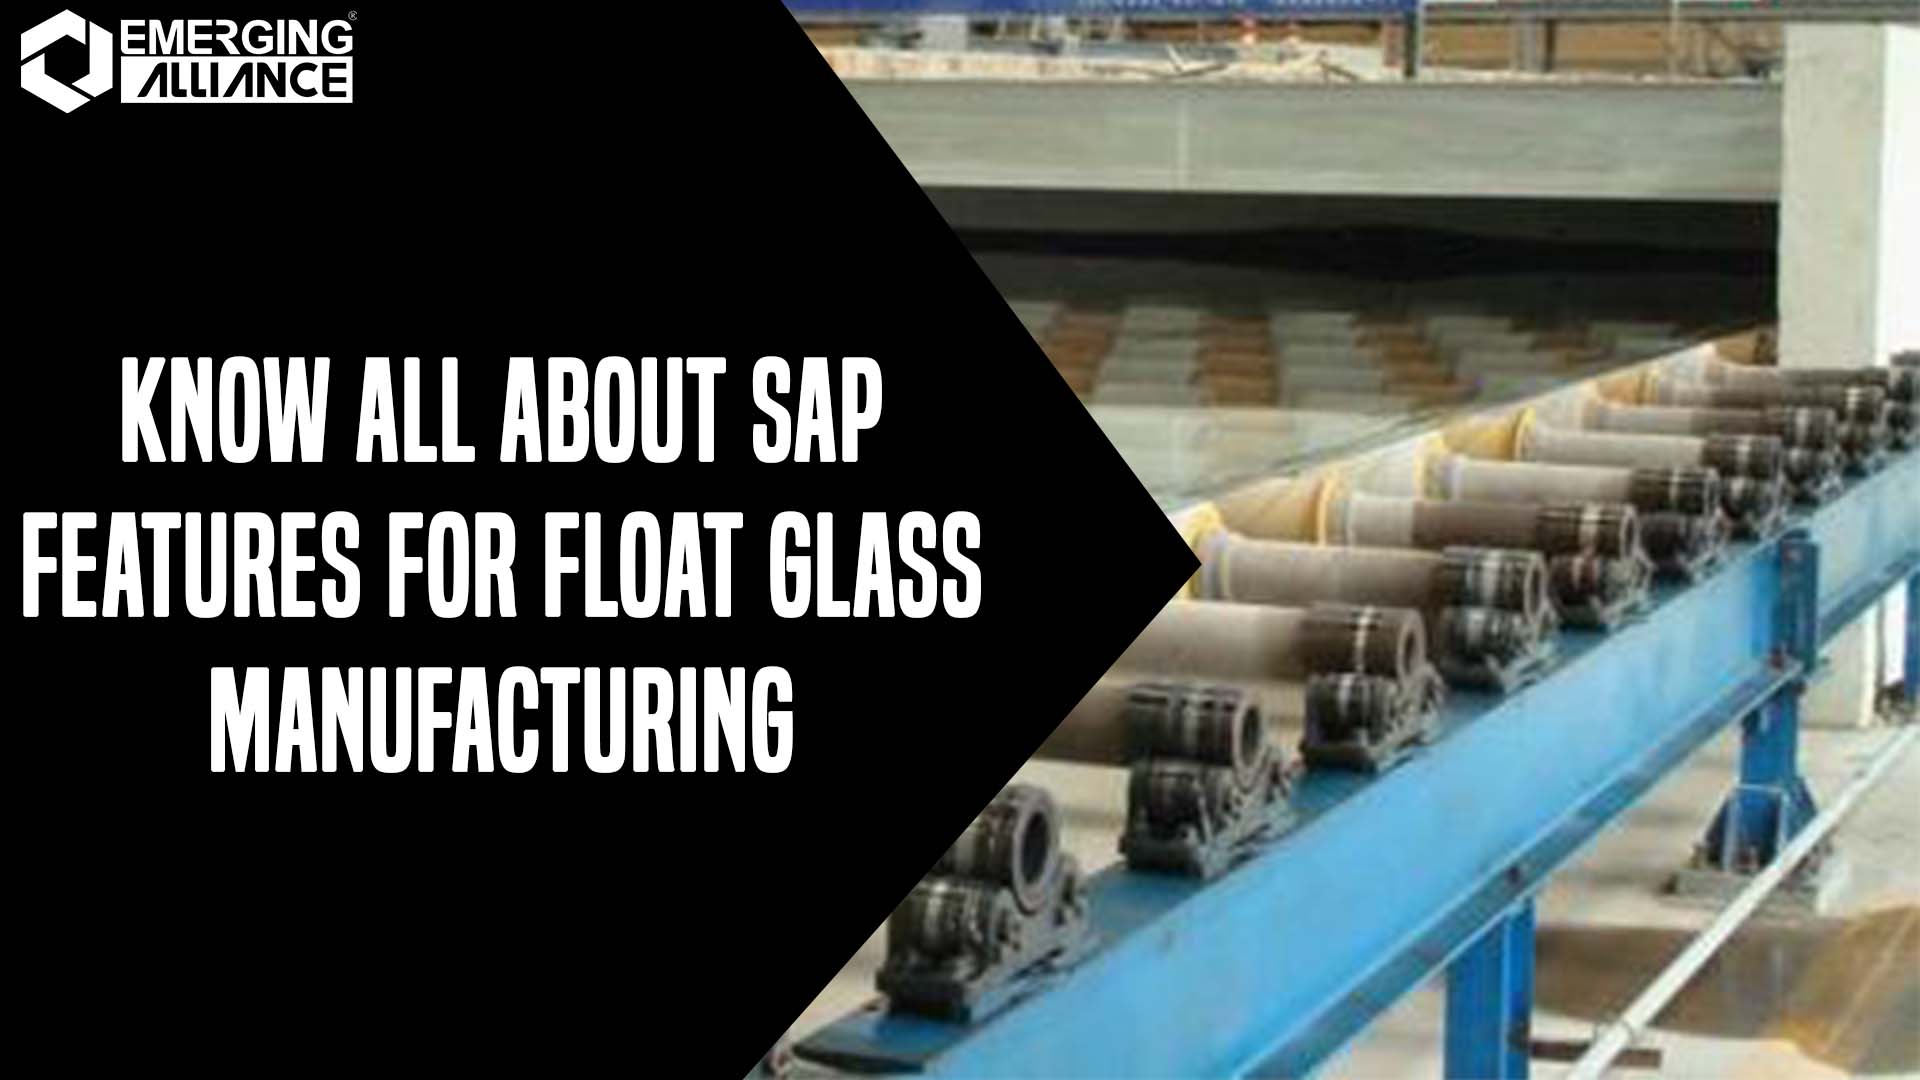 SAP Software for Float Glass Manufacturing